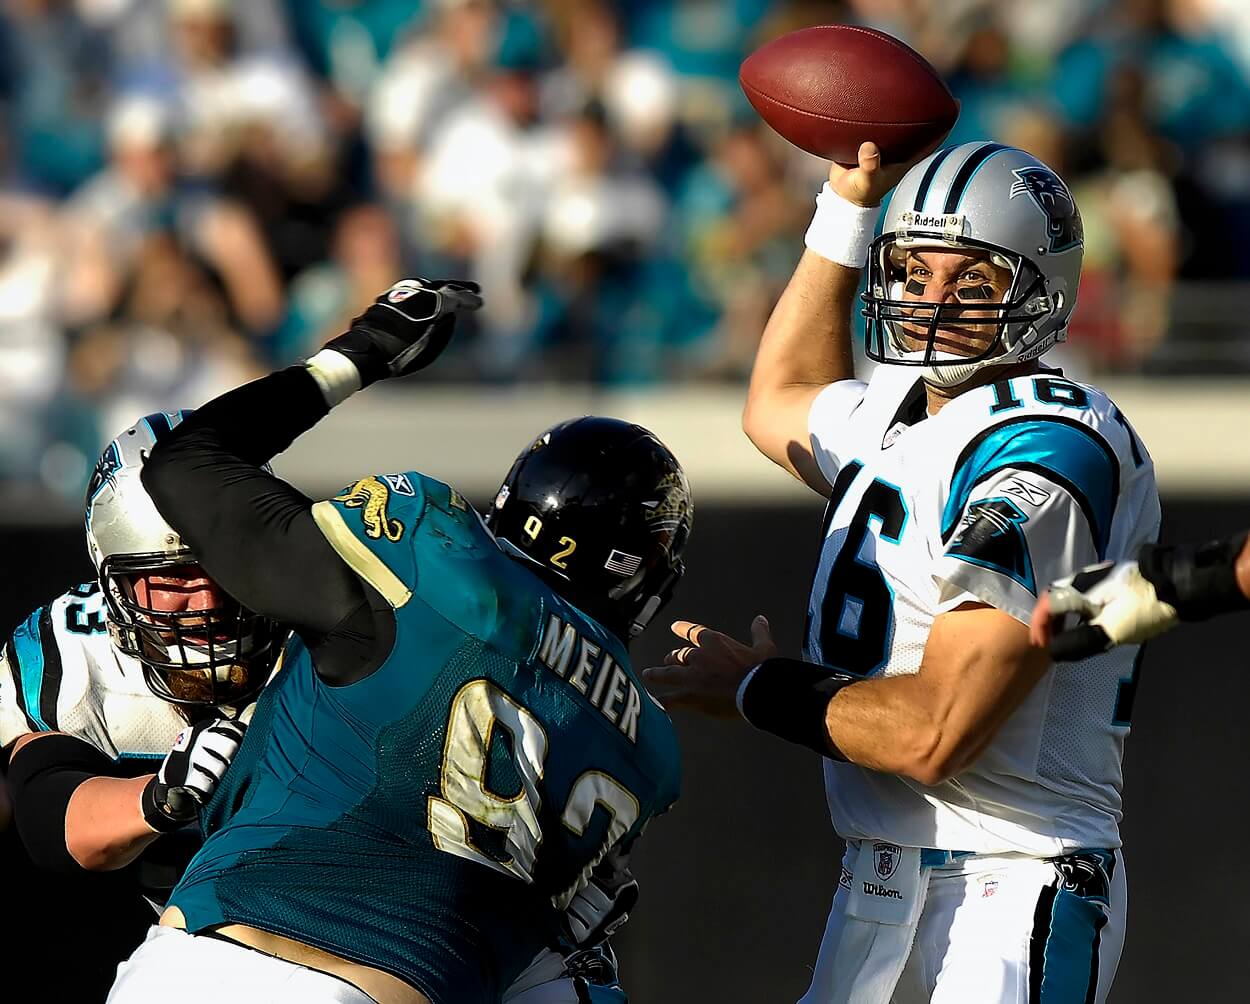 Vinny Testaverde during a 2007 NFL matchup between the Panthers and Jaguars